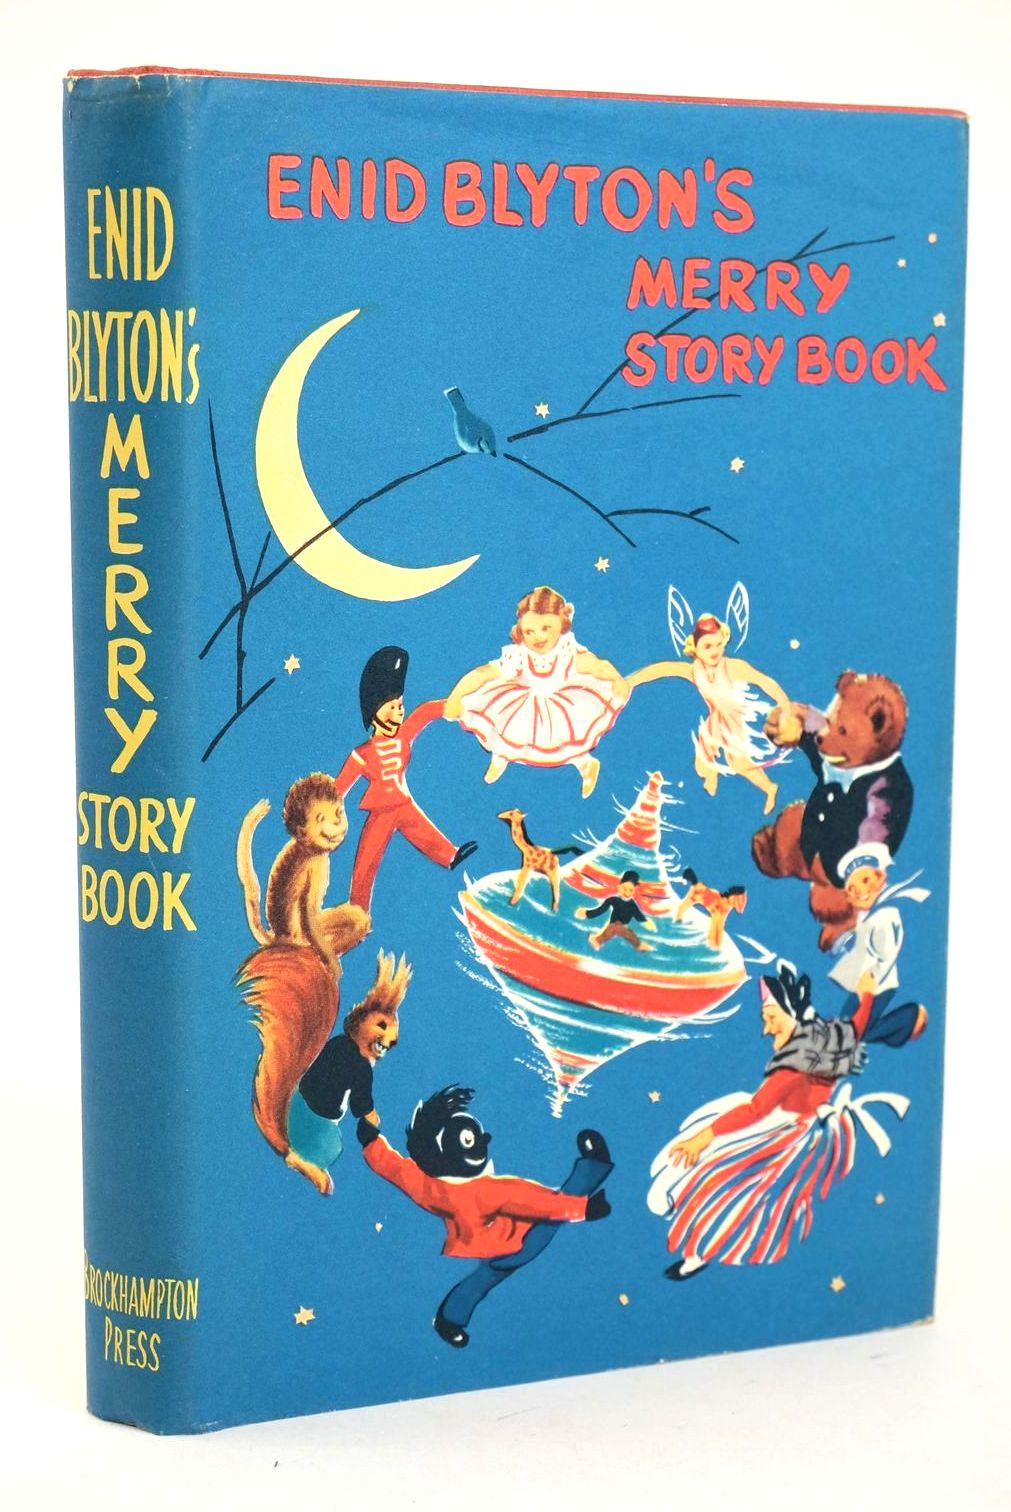 Photo of ENID BLYTON'S MERRY STORY BOOK written by Blyton, Enid illustrated by Soper, Eileen published by Brockhampton Press Ltd. (STOCK CODE: 1318981)  for sale by Stella & Rose's Books